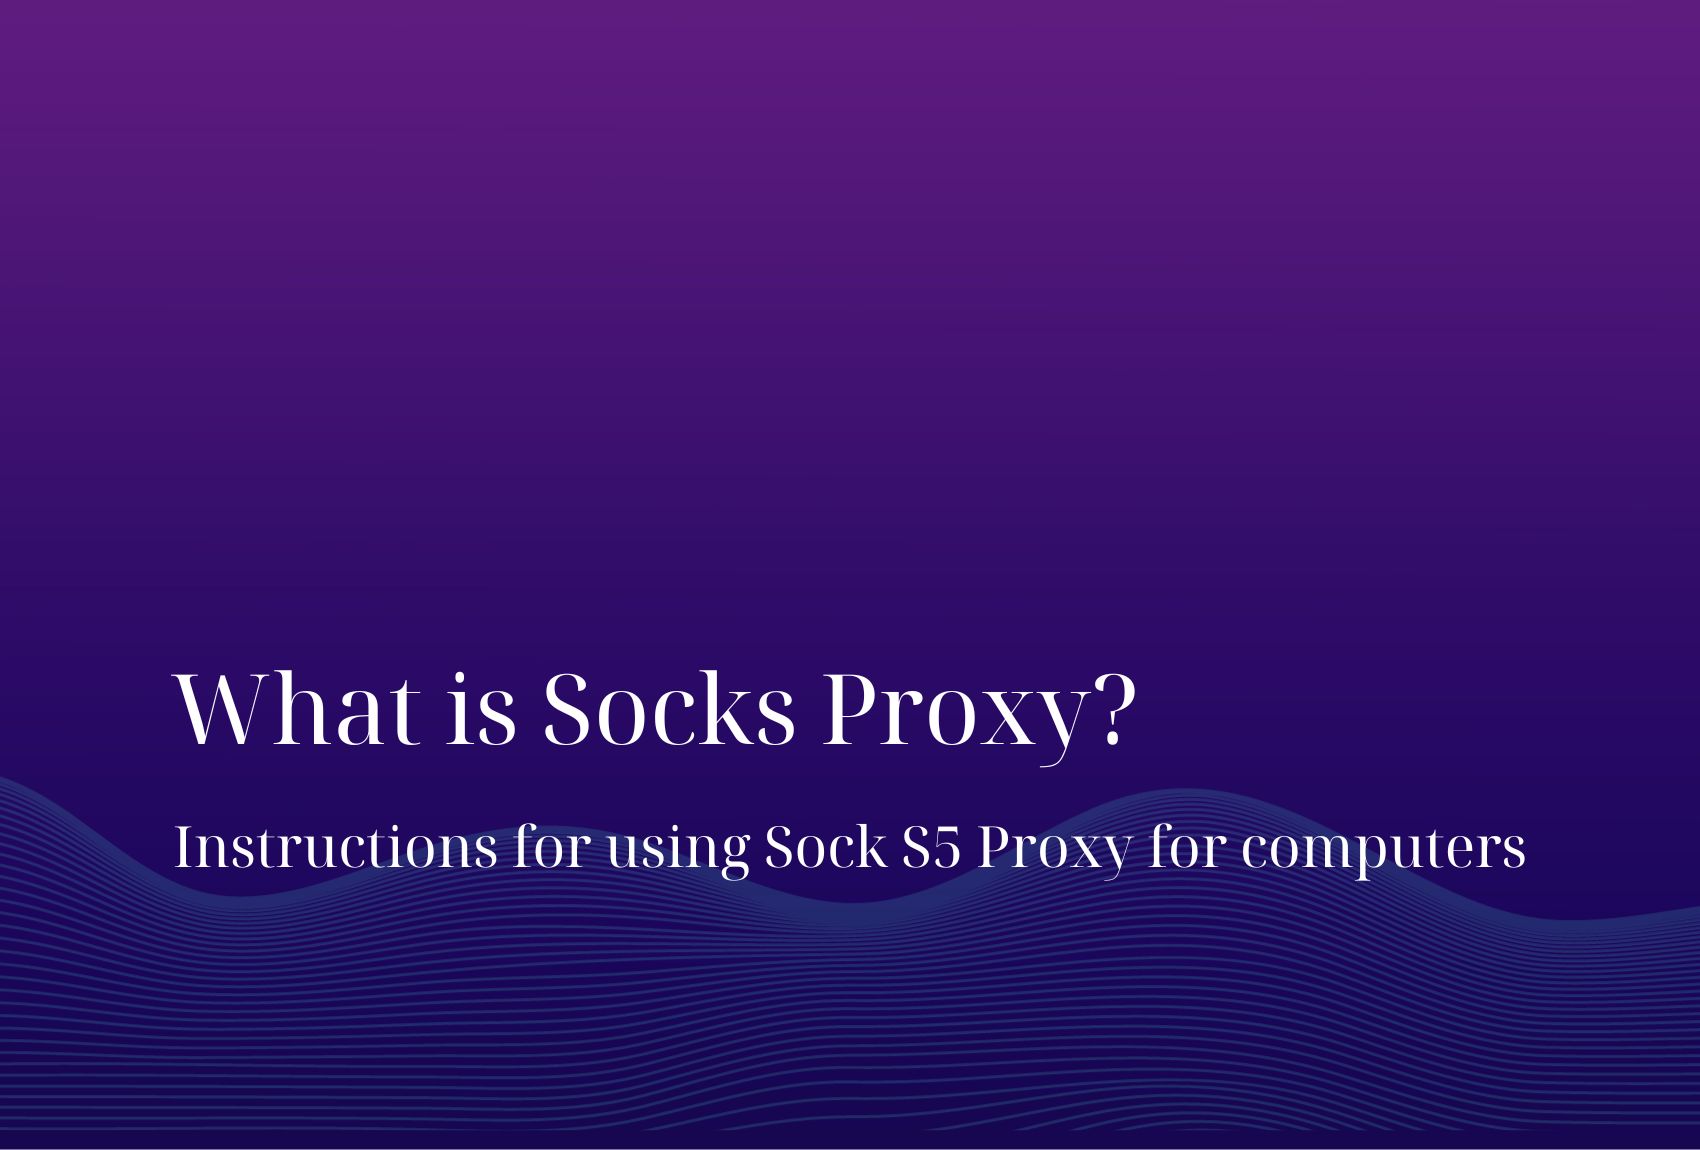 What is Socks Proxy? Instructions for using Sock S5 Proxy for computers